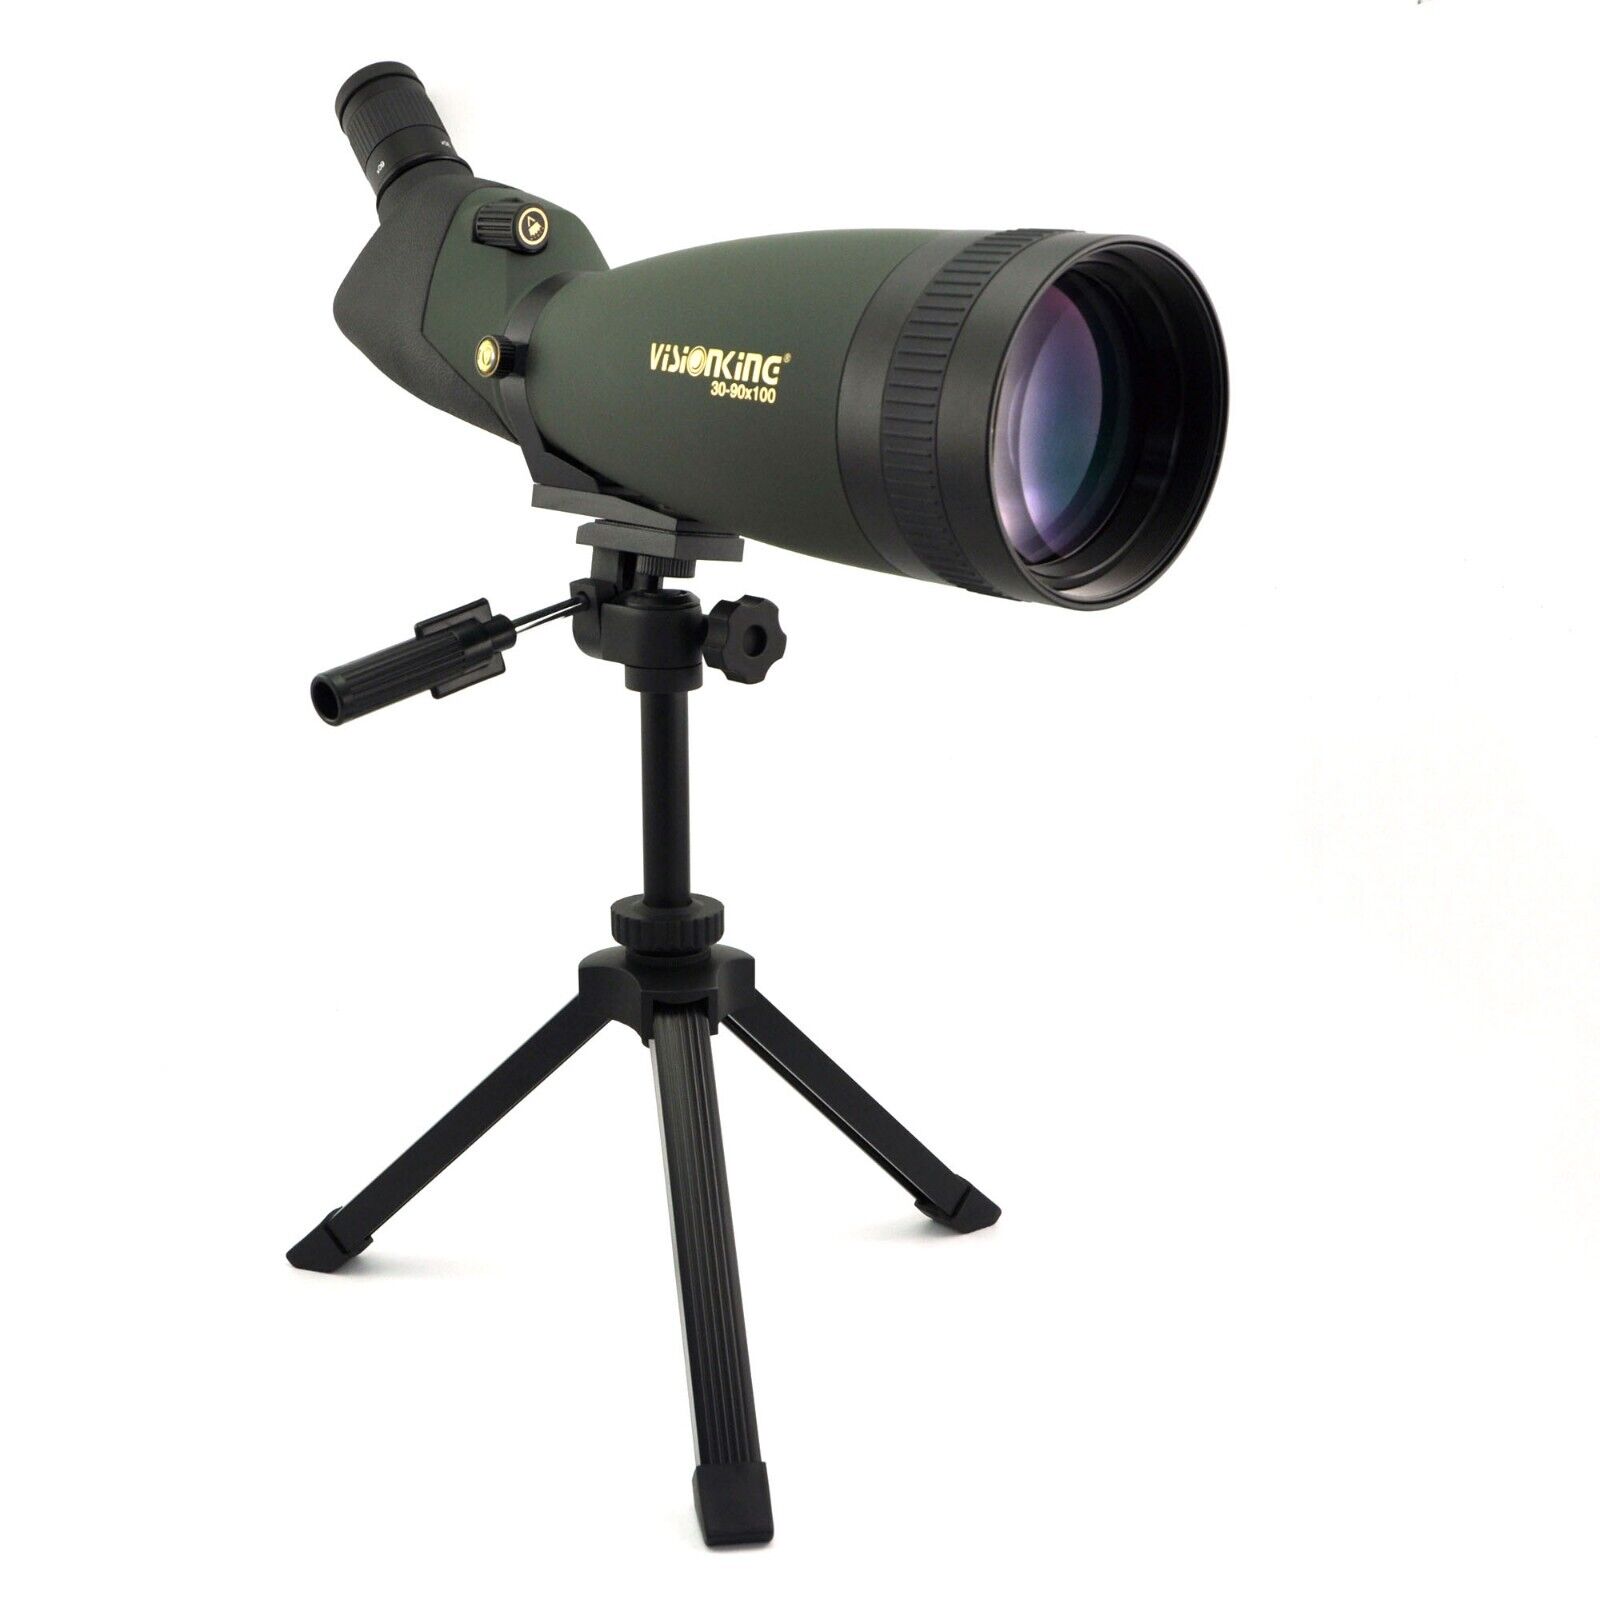 Visionking 30-90x100 Waterproof Spotting Scope  with Tripod Case  Gift 